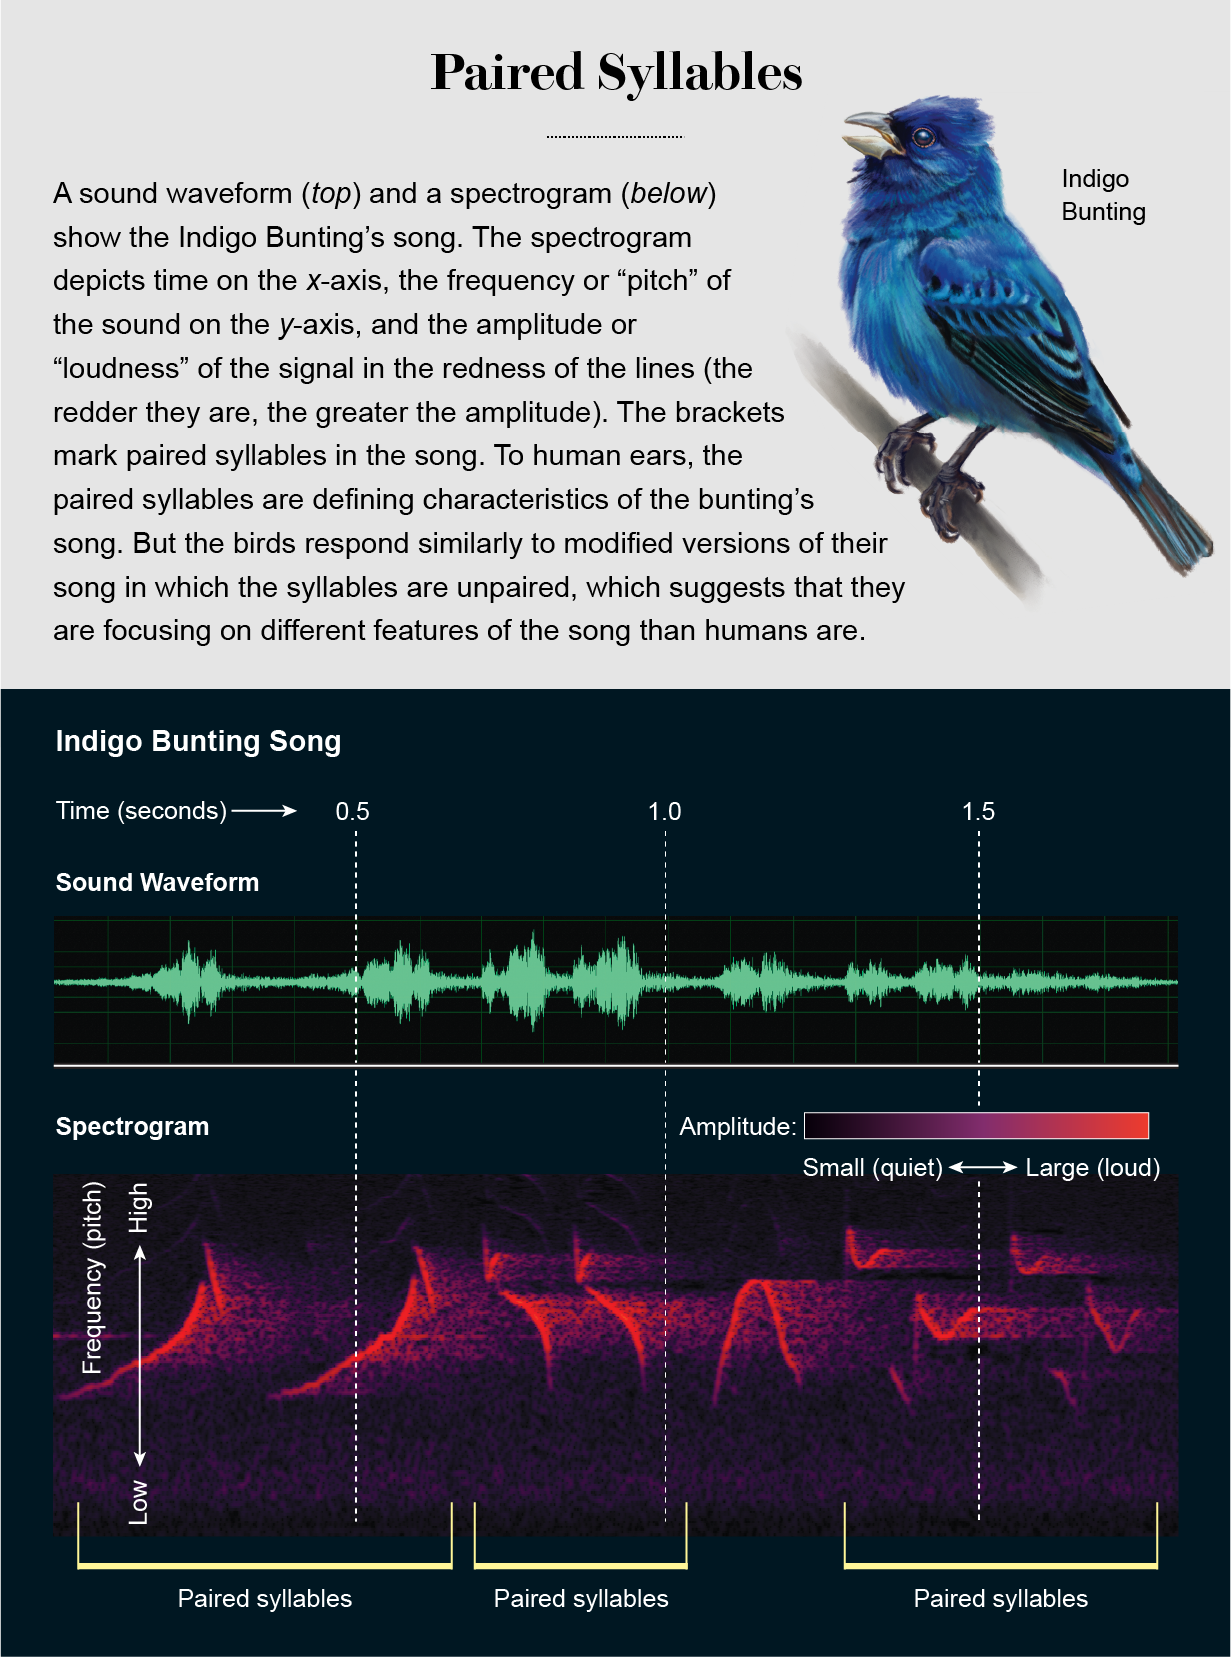 Sound waveform and spectrogram show the Indigo Bunting song and highlight paired syllables perceived by human ears.